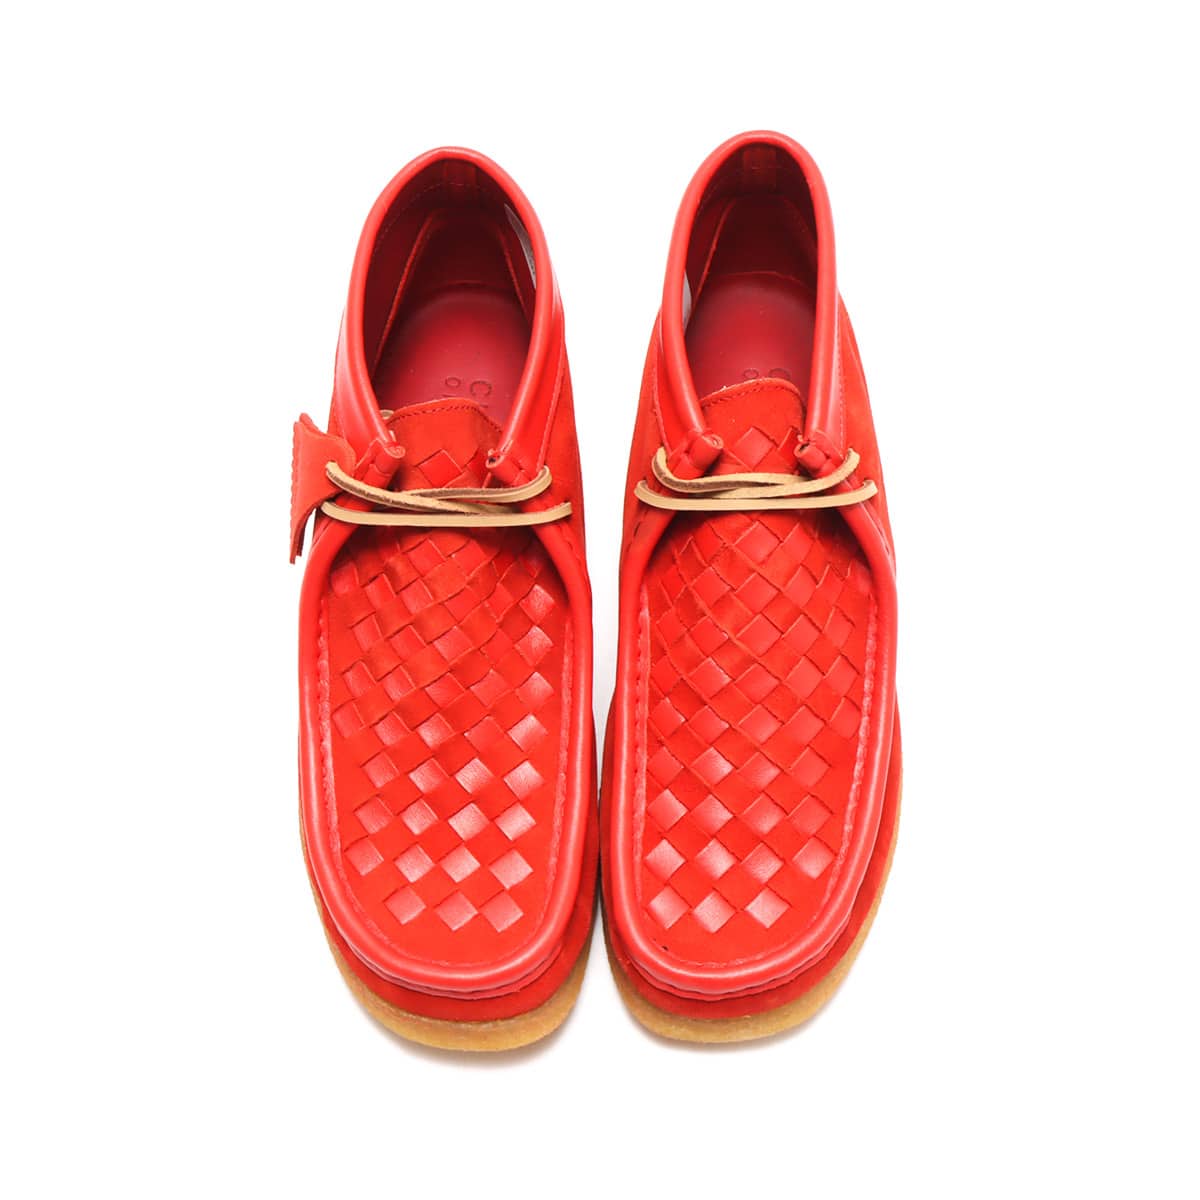 Clarks Wallabee Boot Red Woven 21SP-I